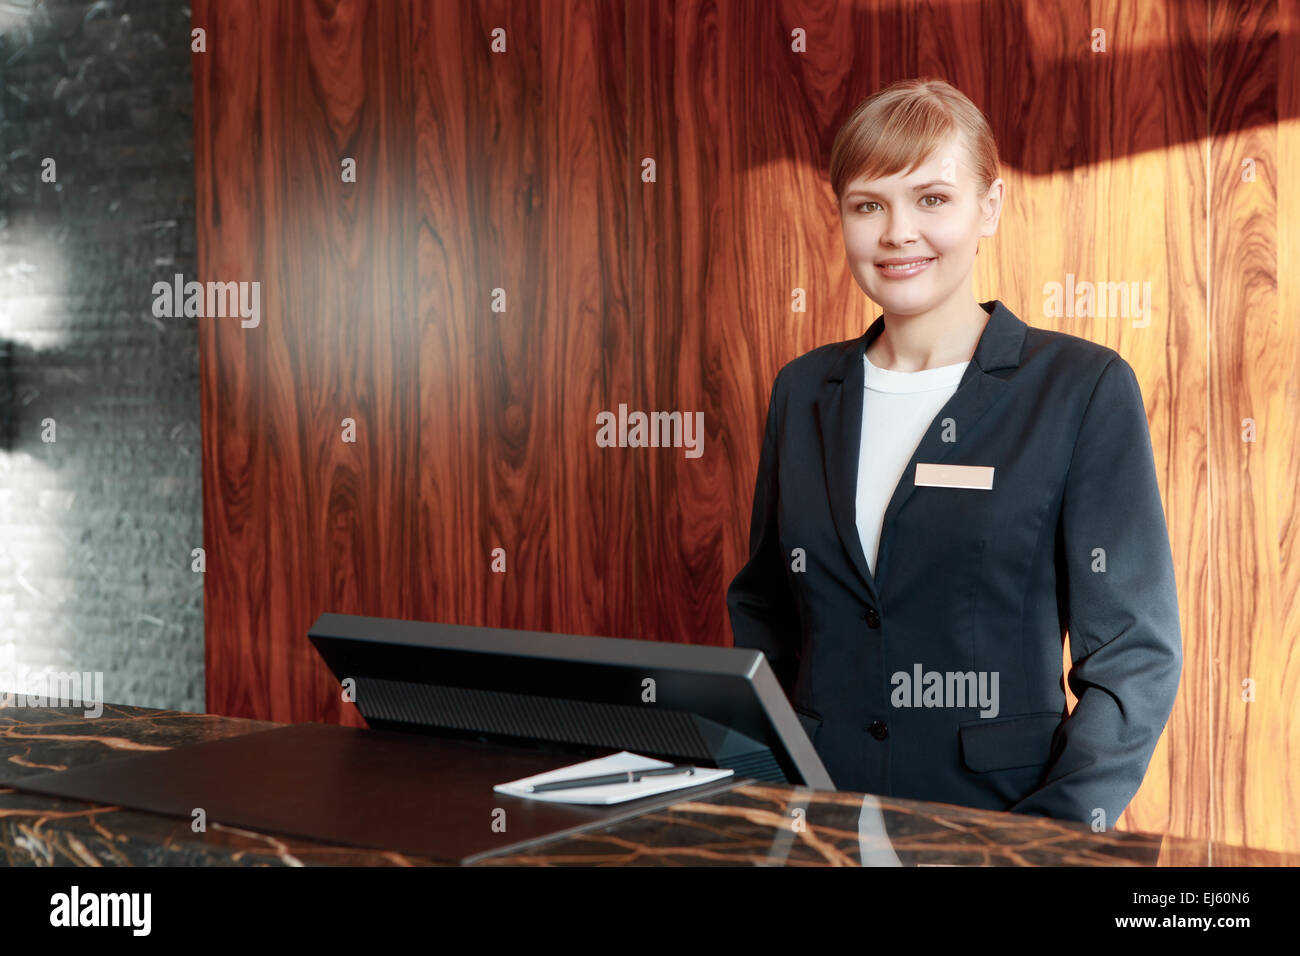 Charming receptionist at work Stock Photo